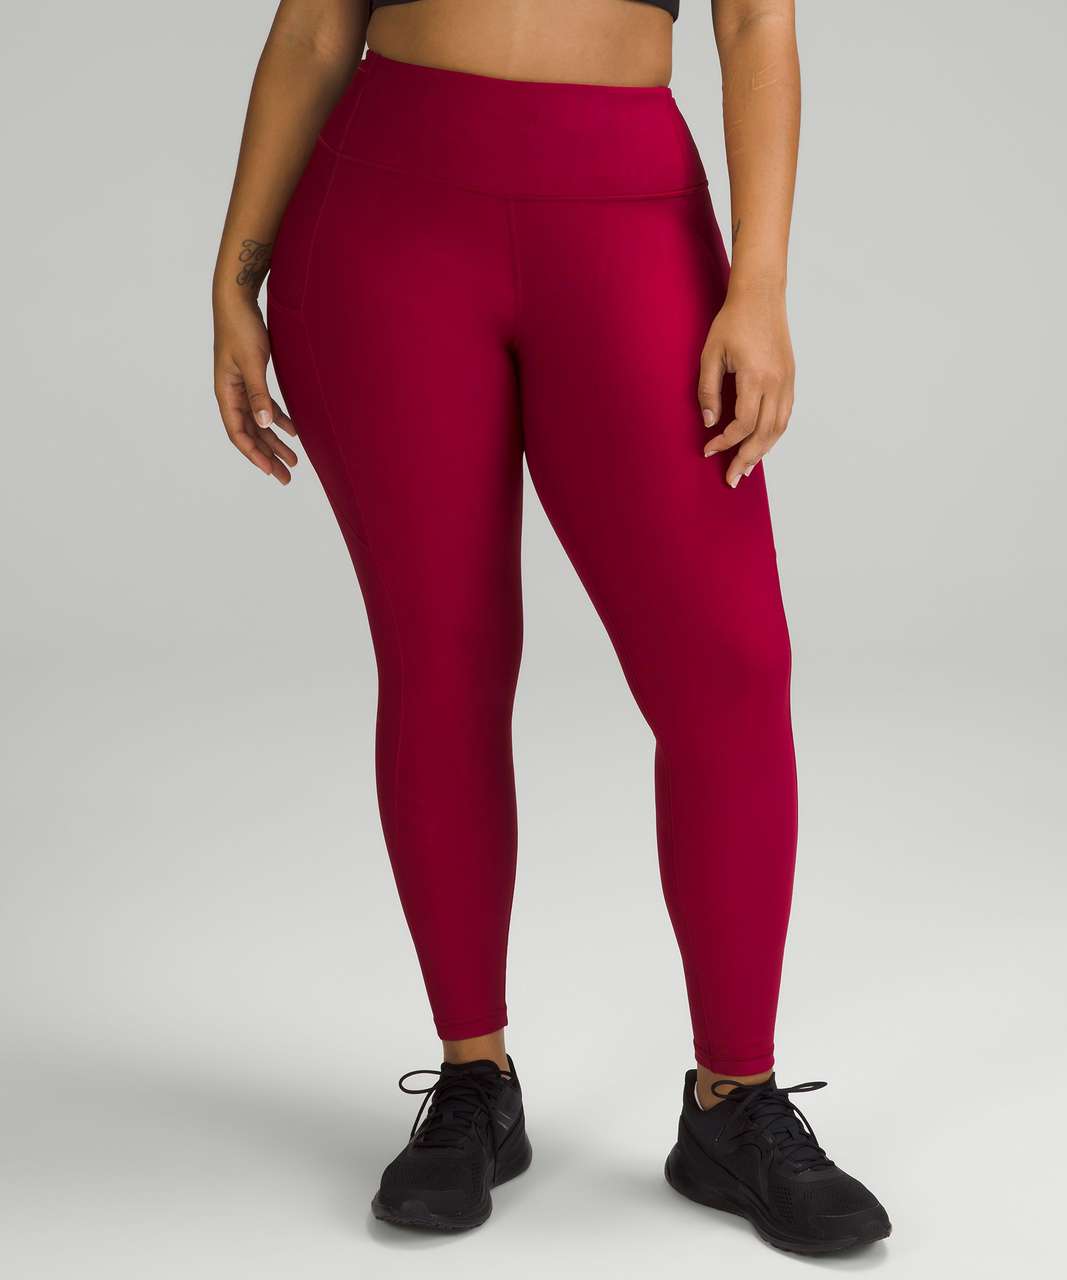 Lululemon Fast and Free High-Rise Fleece Tight 28" - Pomegranate